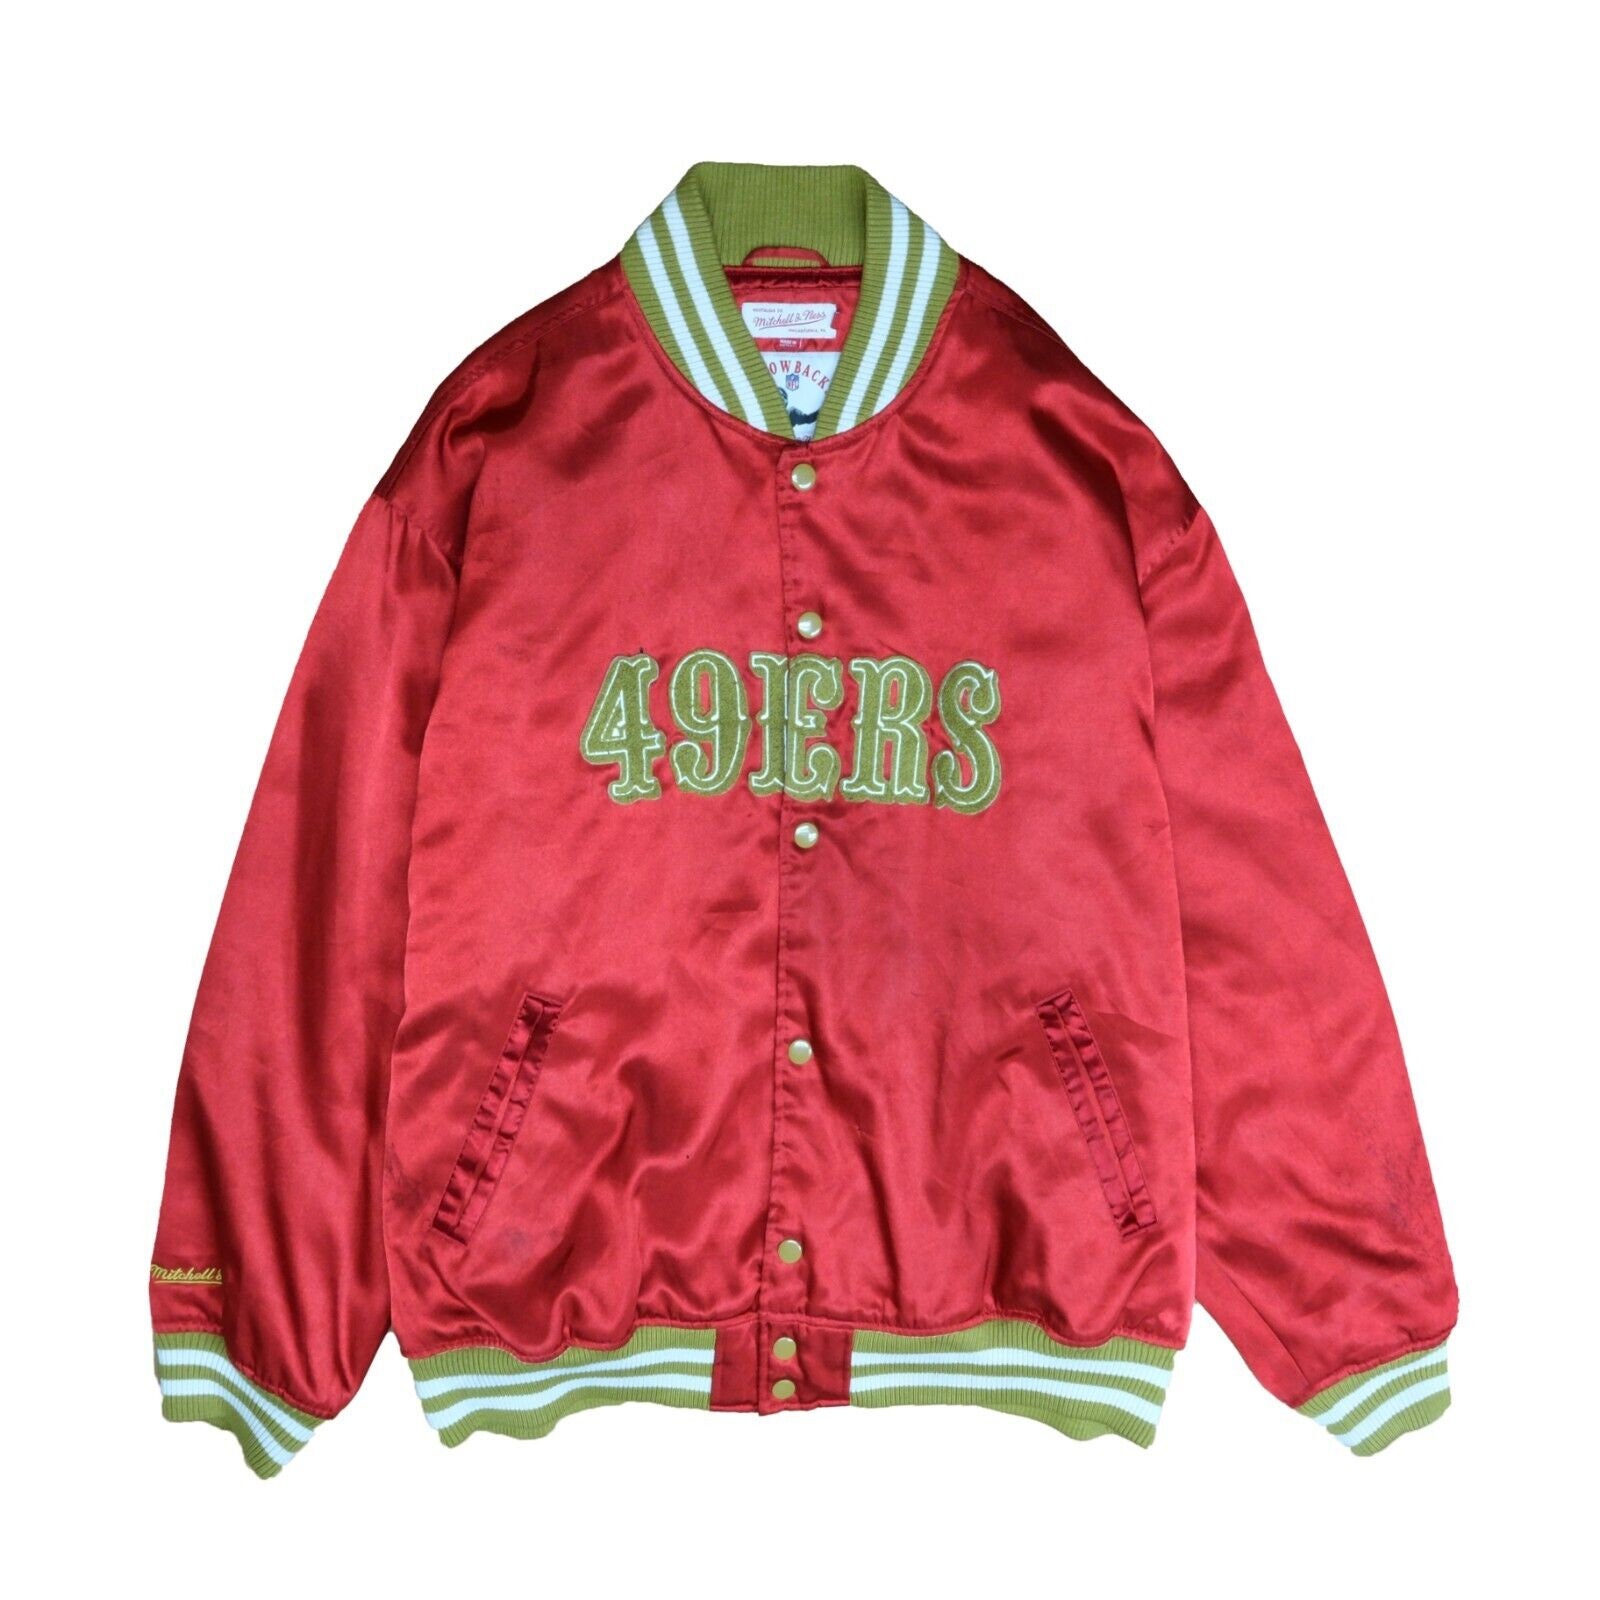 Mitchell & Ness Nfl San Francisco 49ers Satin Jacket in Black for Men